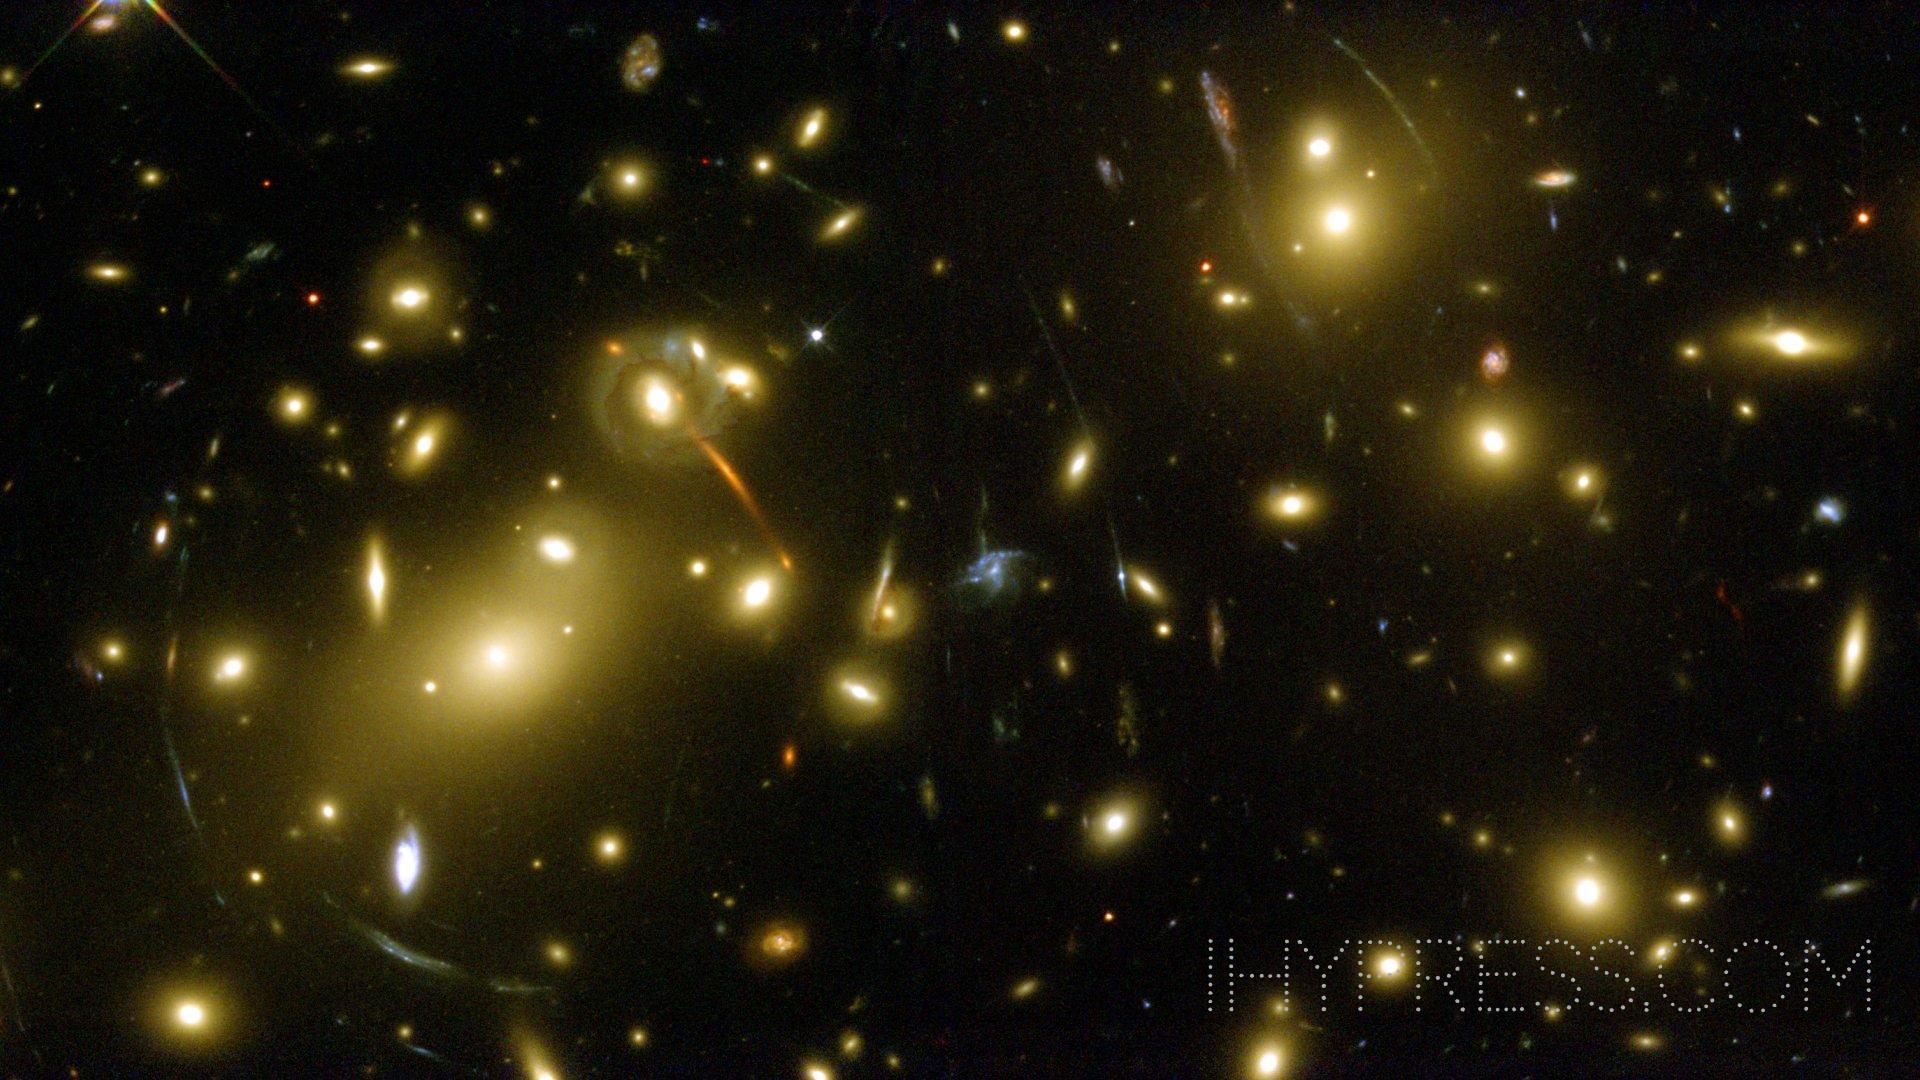 Hubble Space Telescope Collection (03)